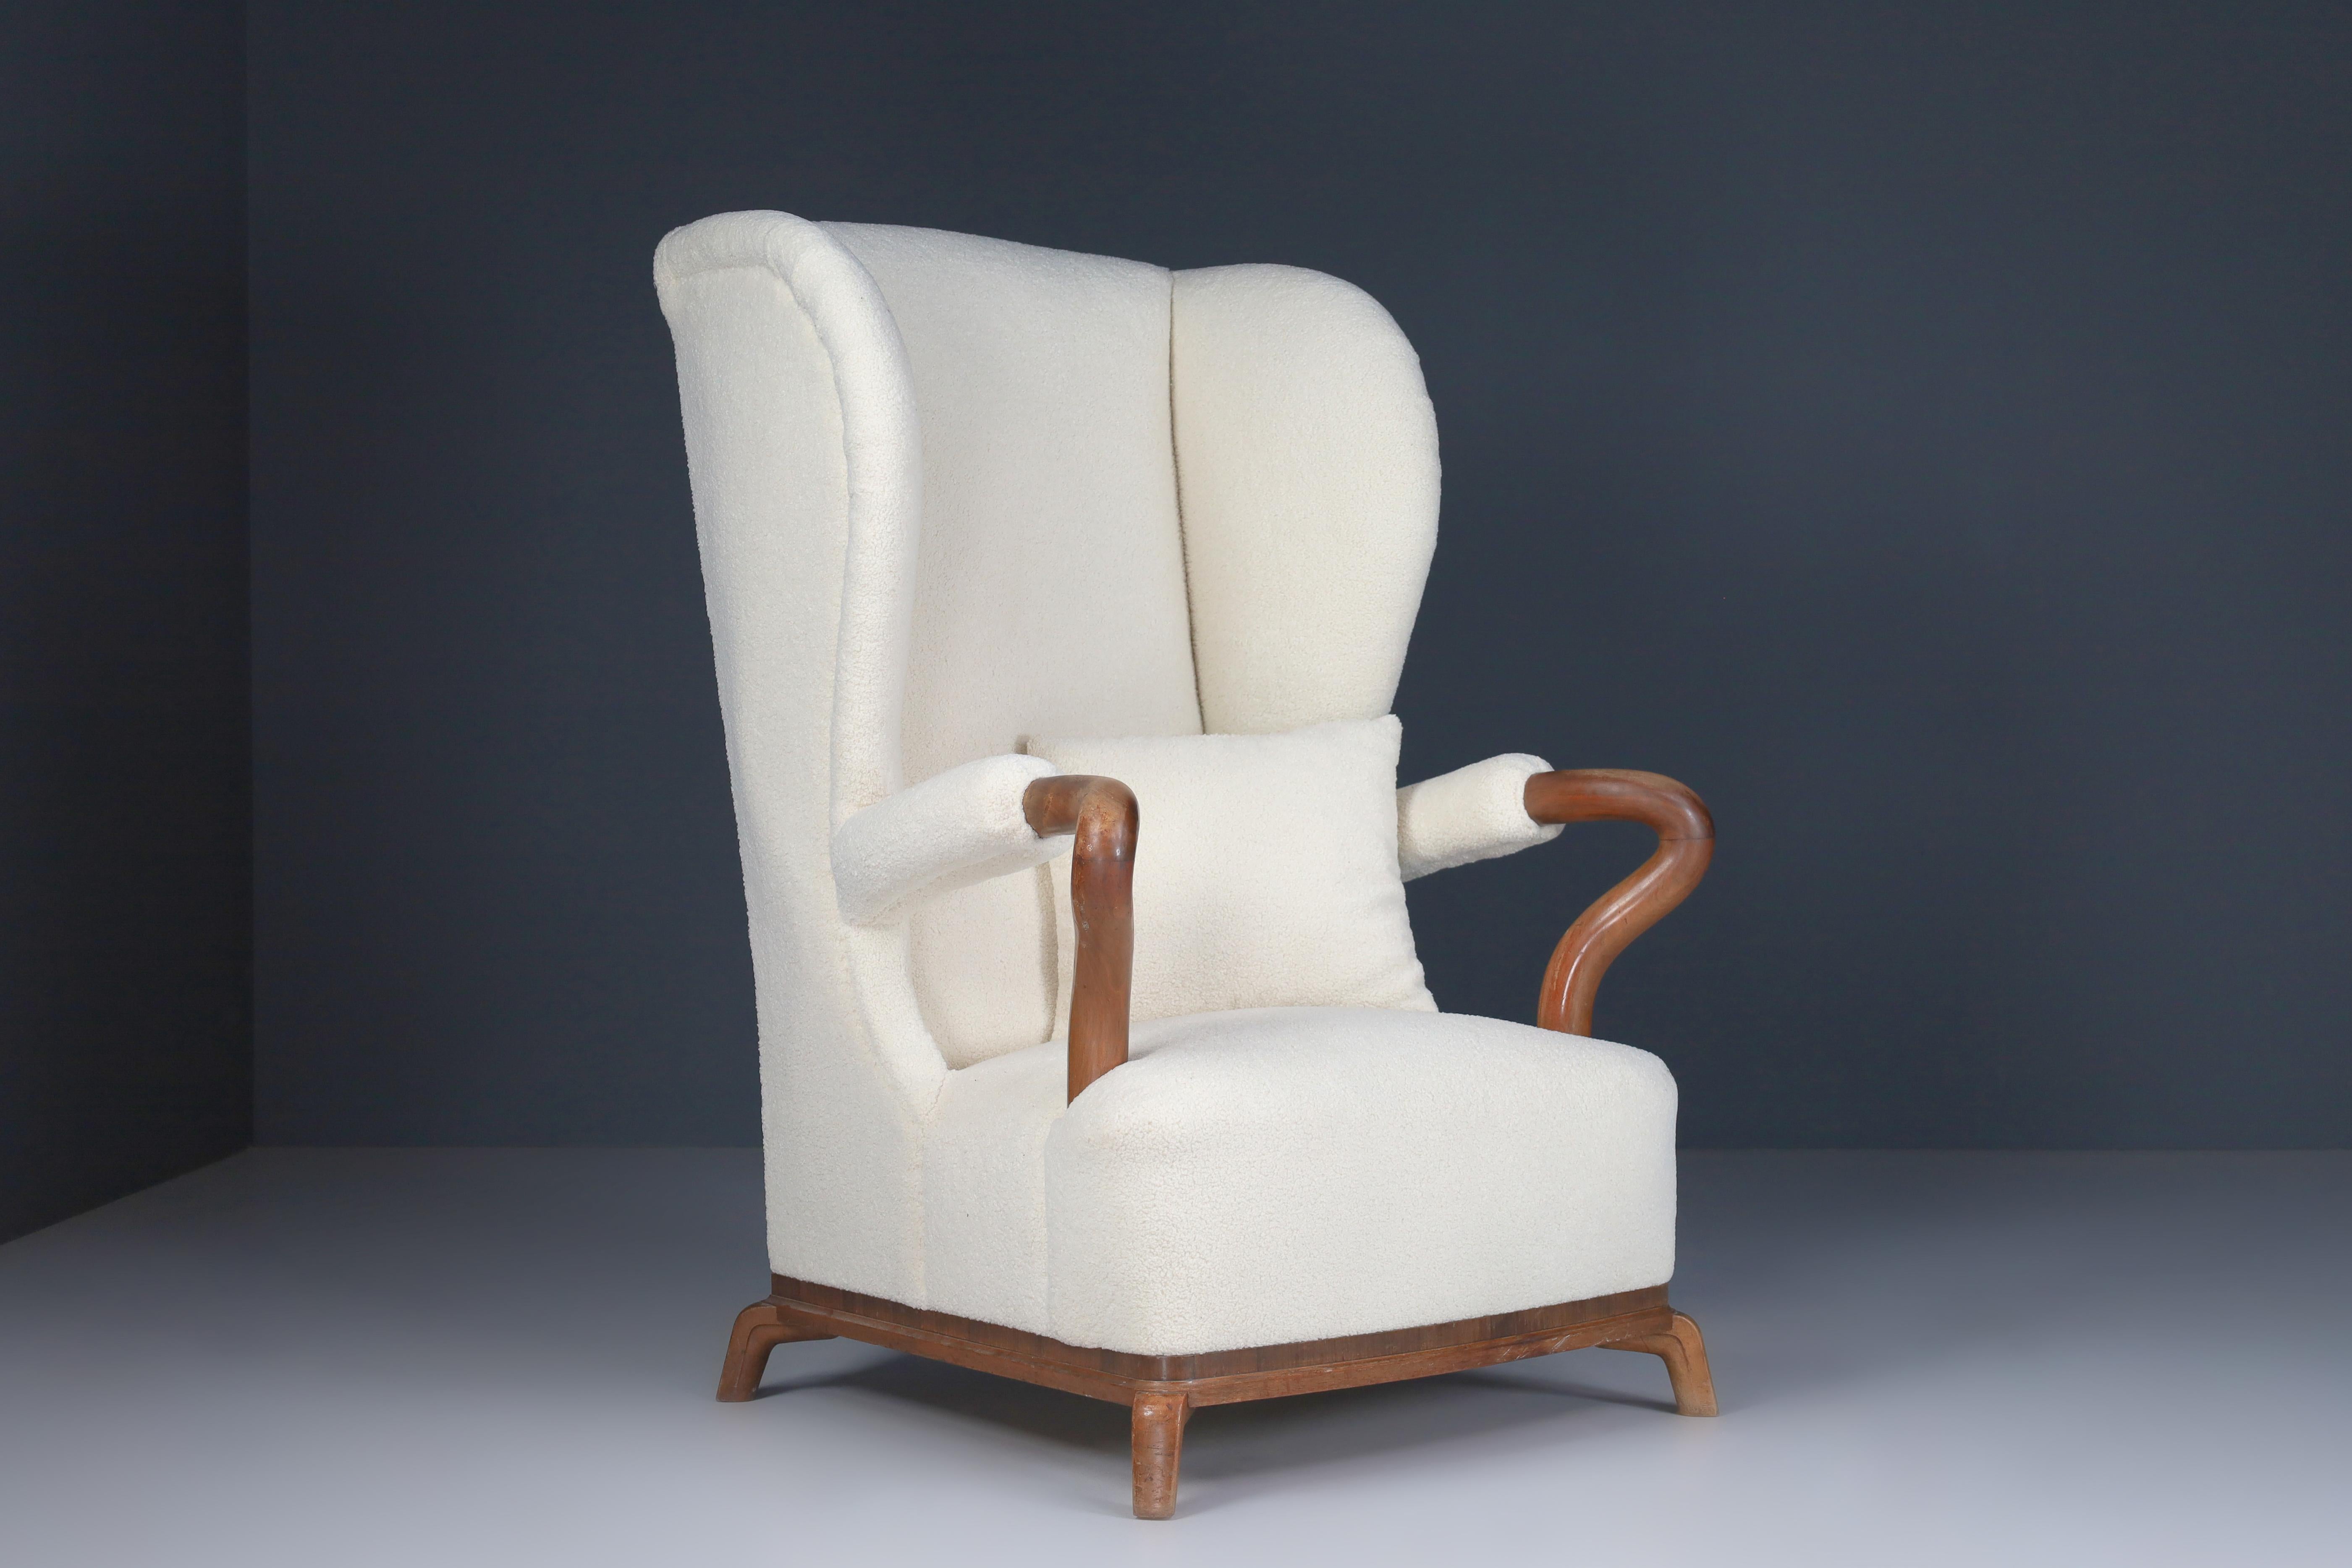 Large Monumental Wingback Armchair in Re-upholstered Teddy Fabric, France 1930s For Sale 5